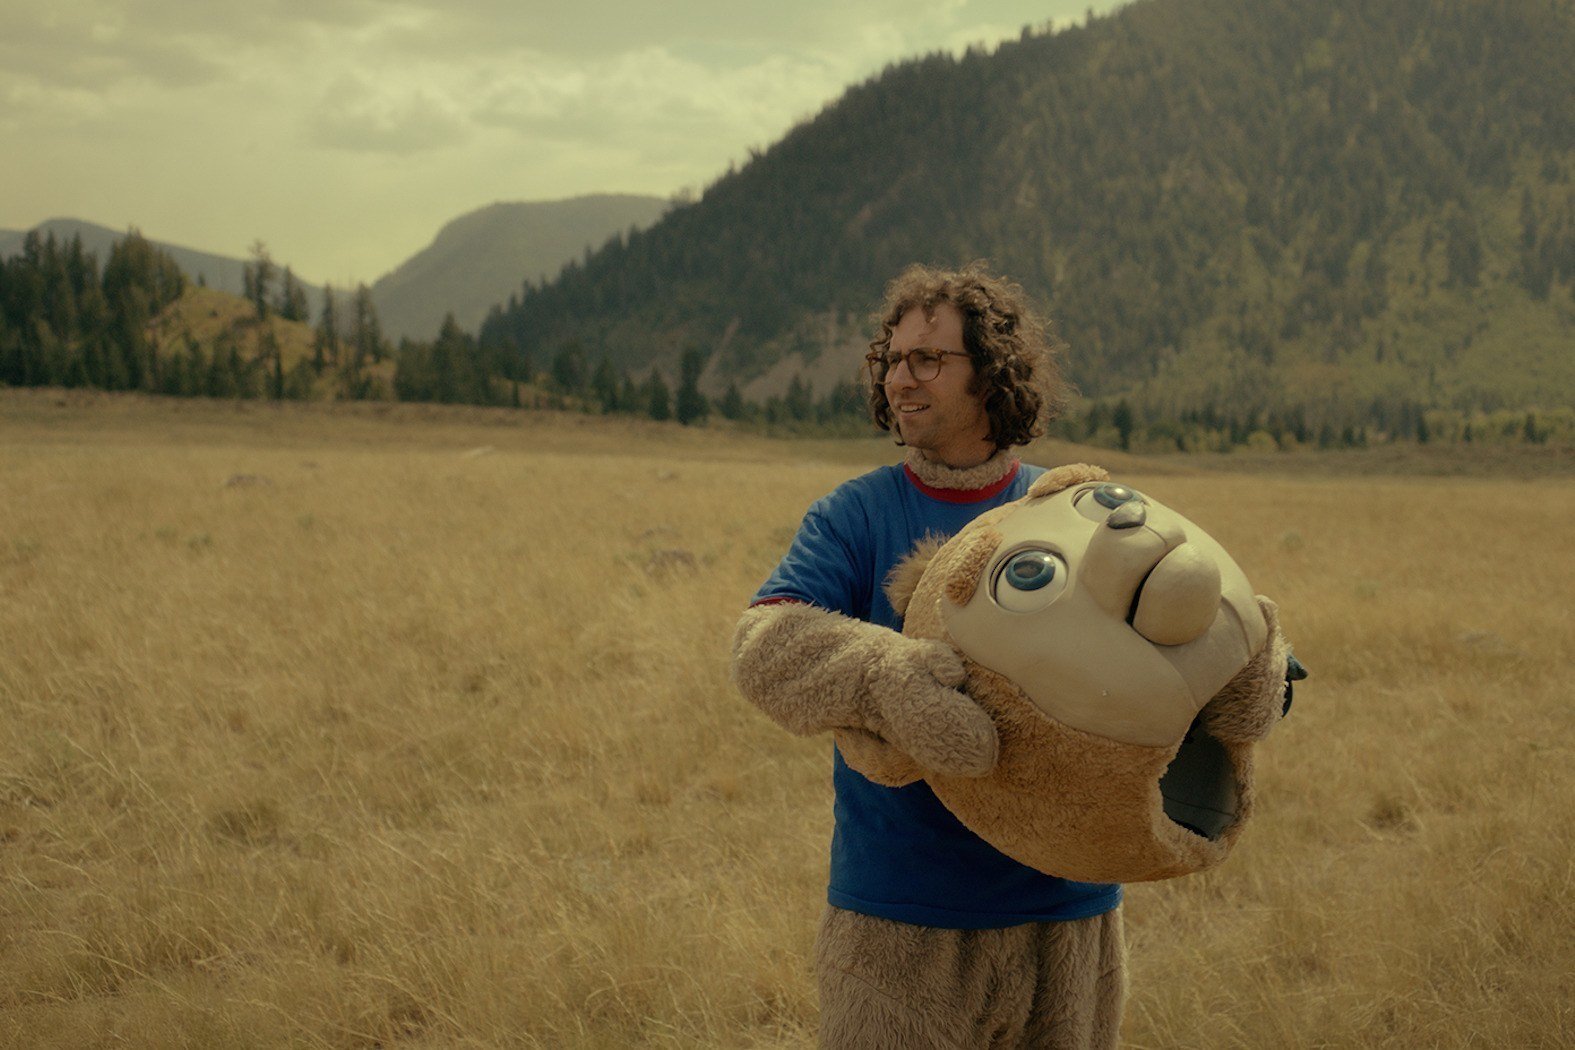 Brigsby BearDirector Dave McCary. USA, 2017. 16+100 minutes.